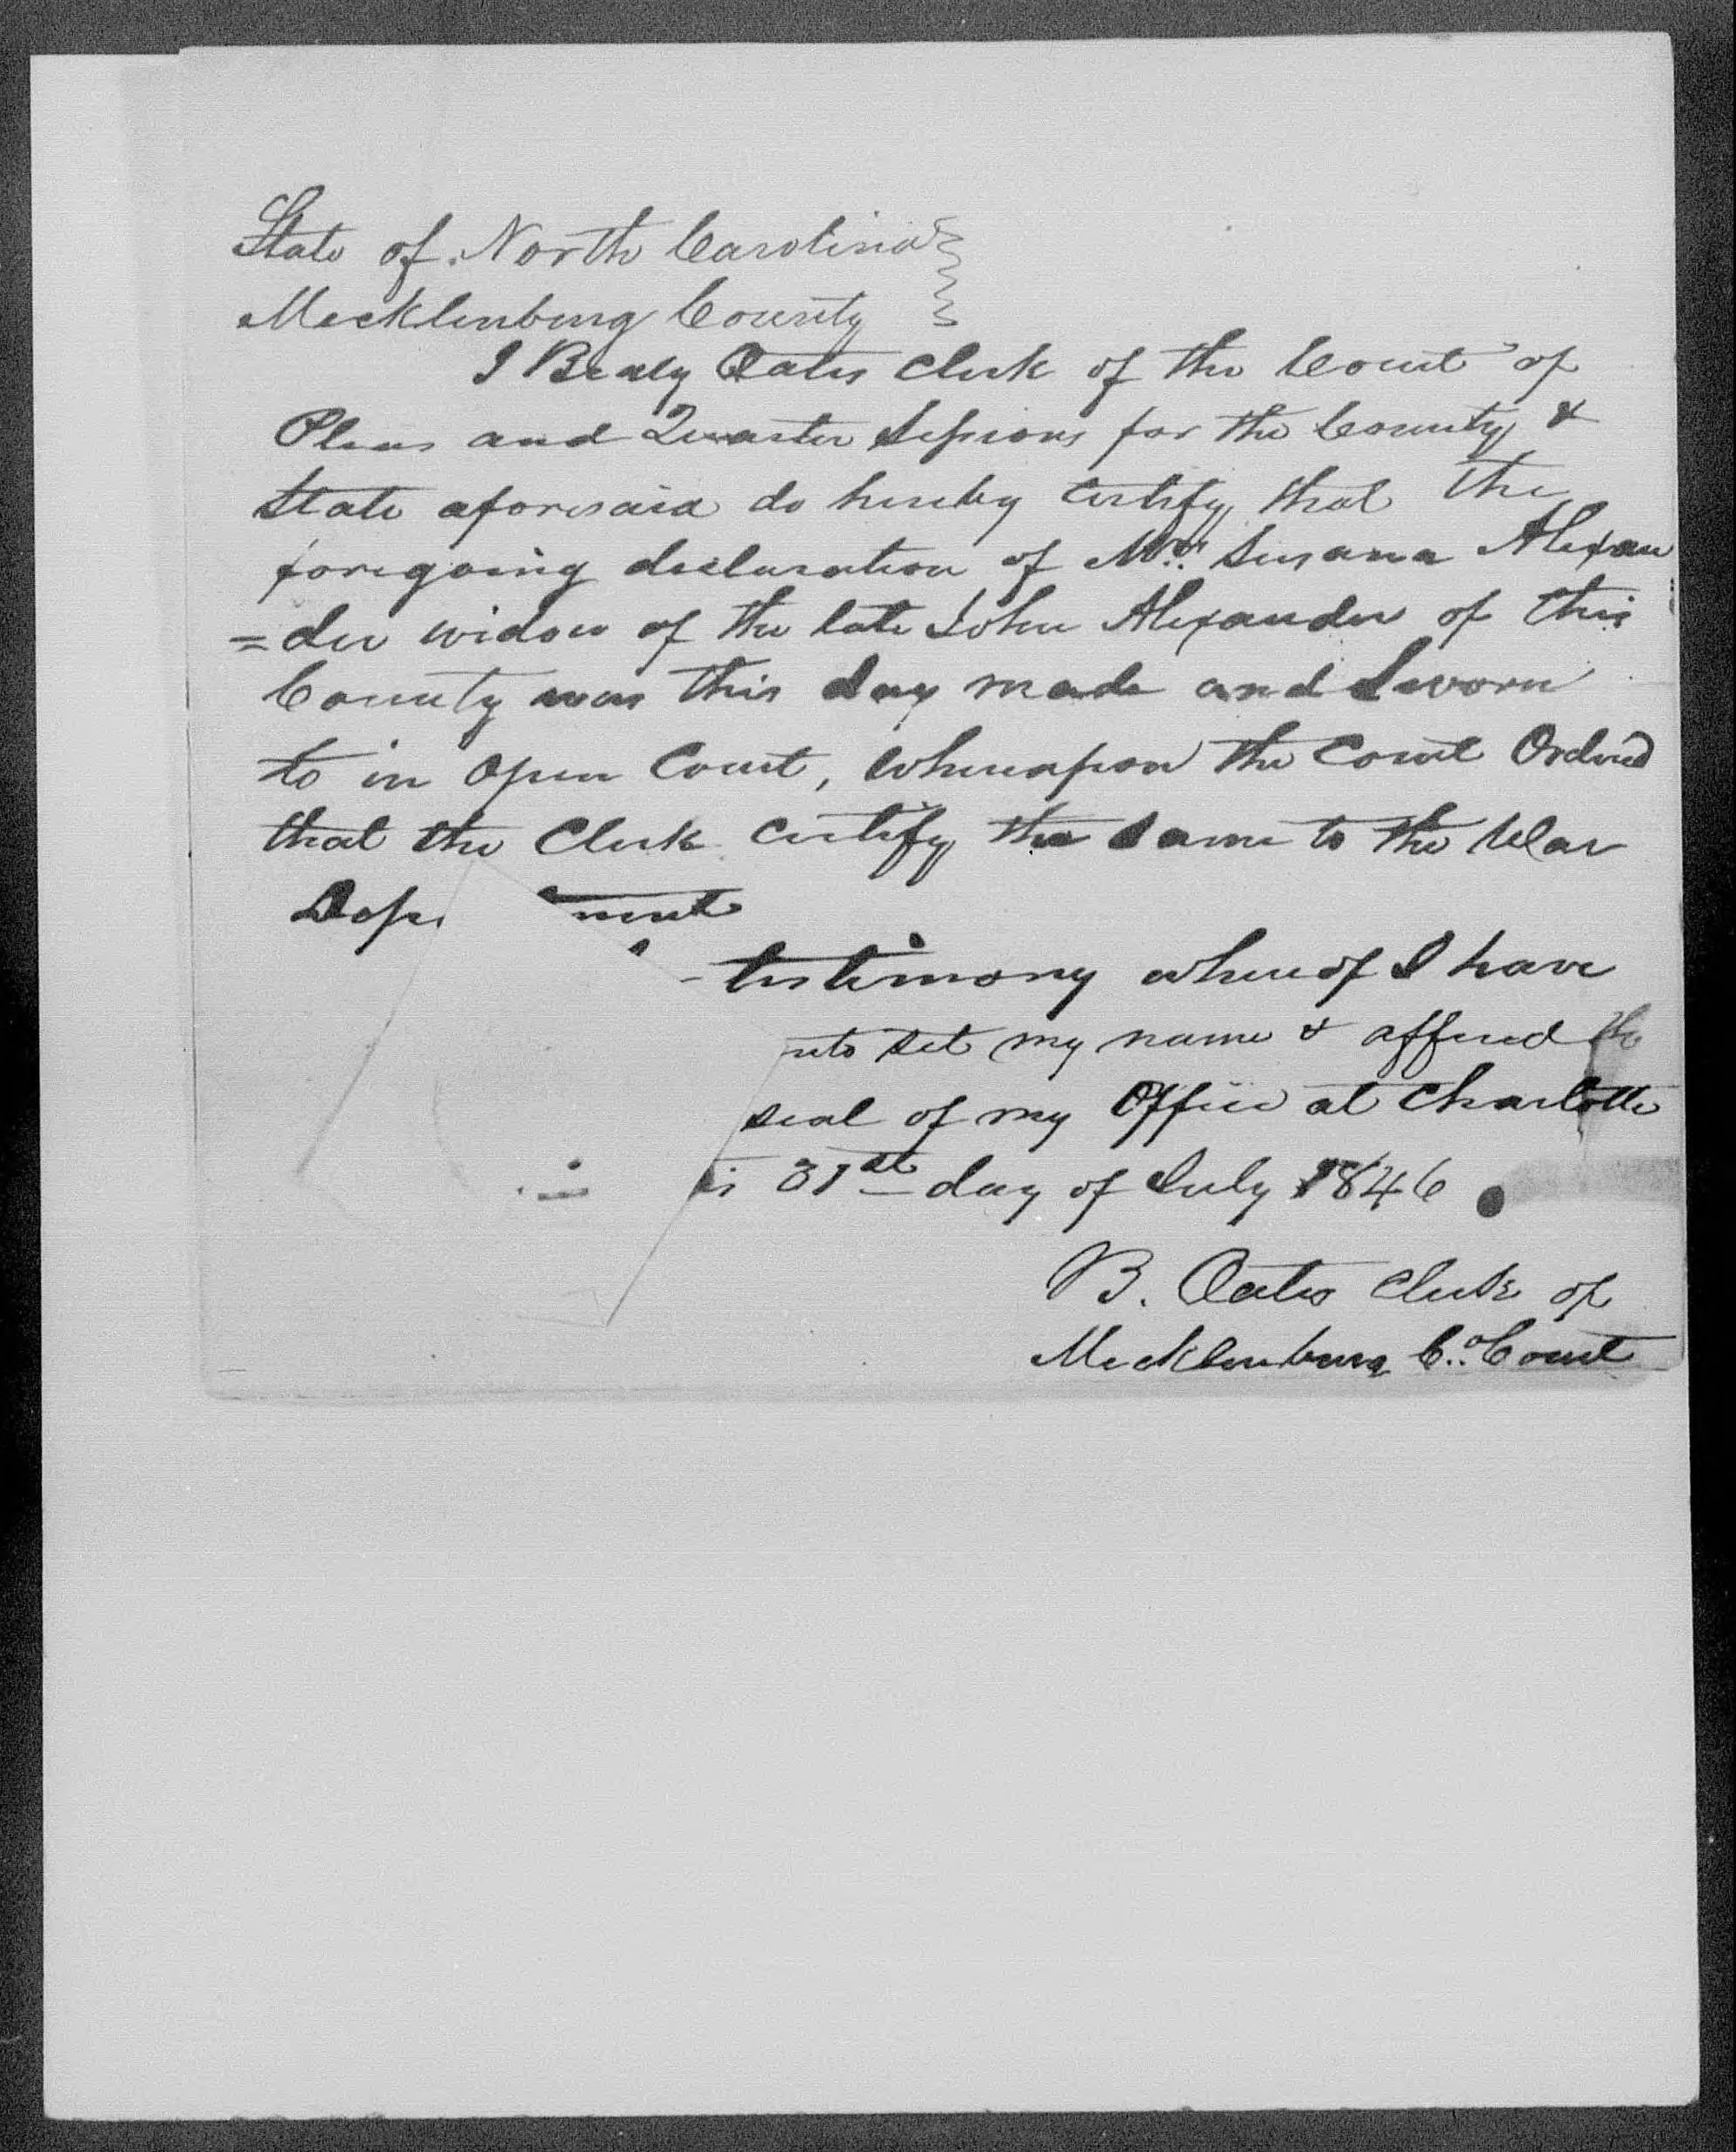 Application for a Widow's Pension from Susana Alexander, 31 July 1846, page 1